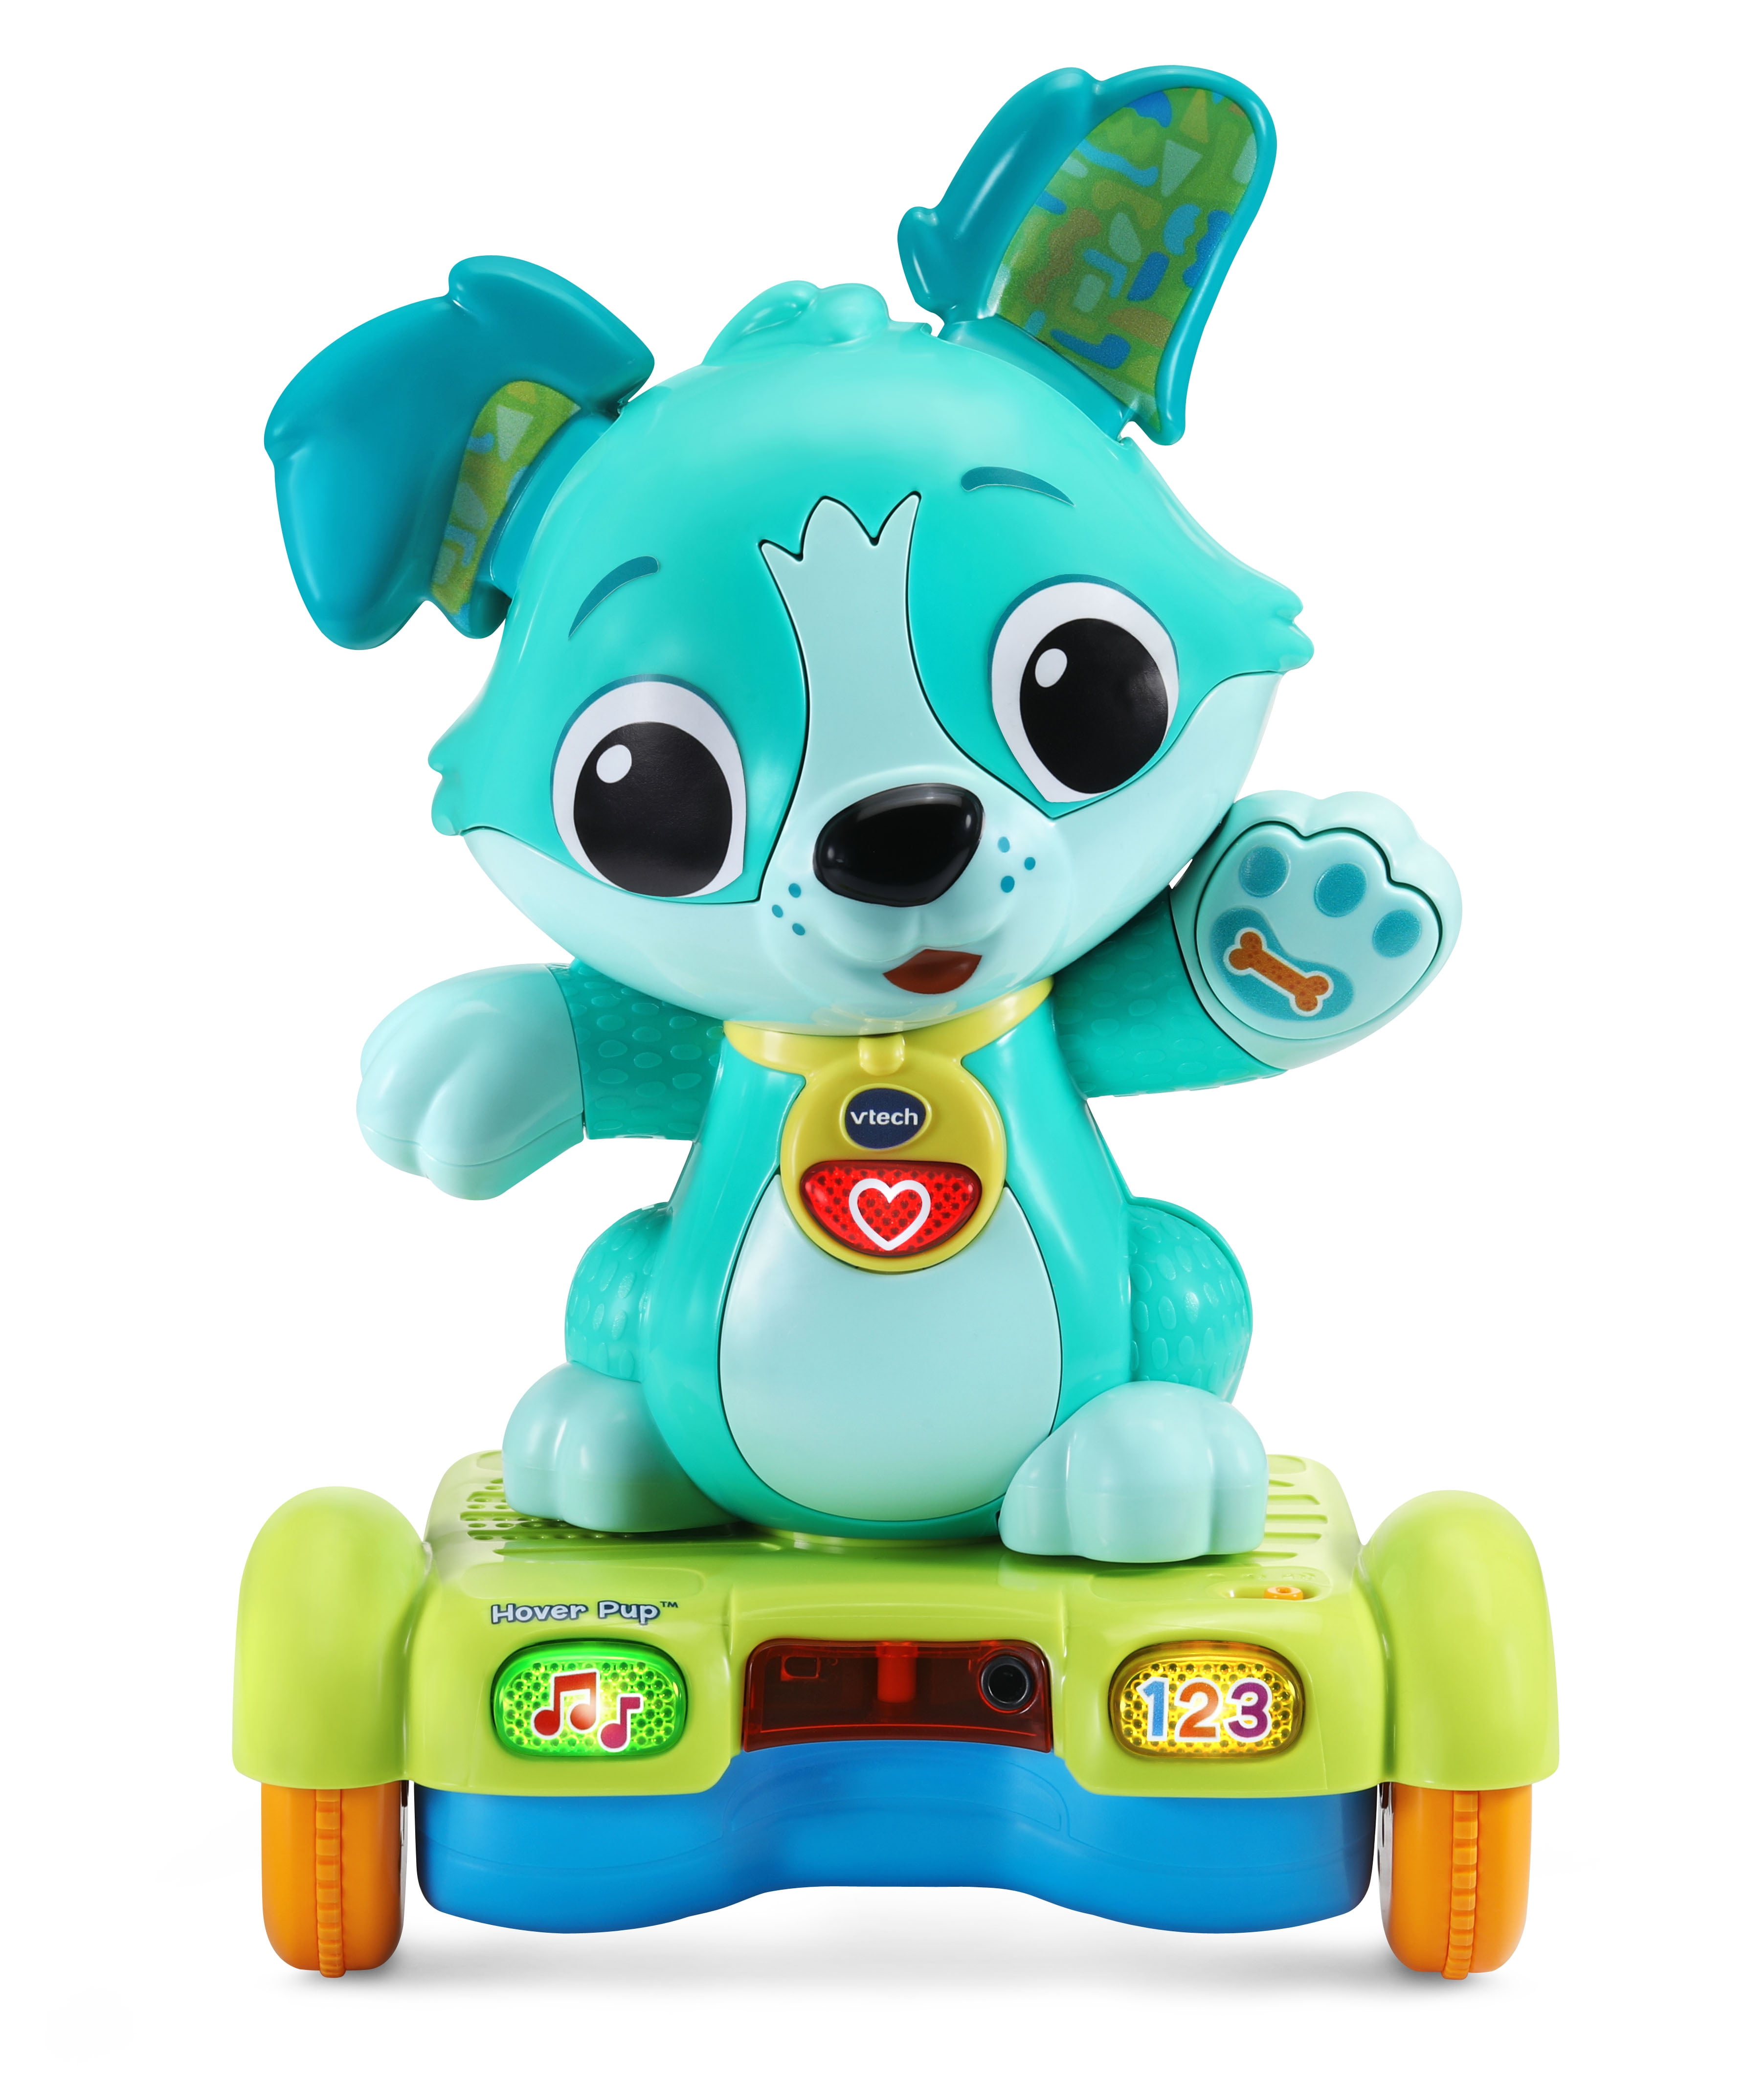 VTech Hover Pup Dance and Follow Learning Toy With Motion Sensors, Walmart Exclusive